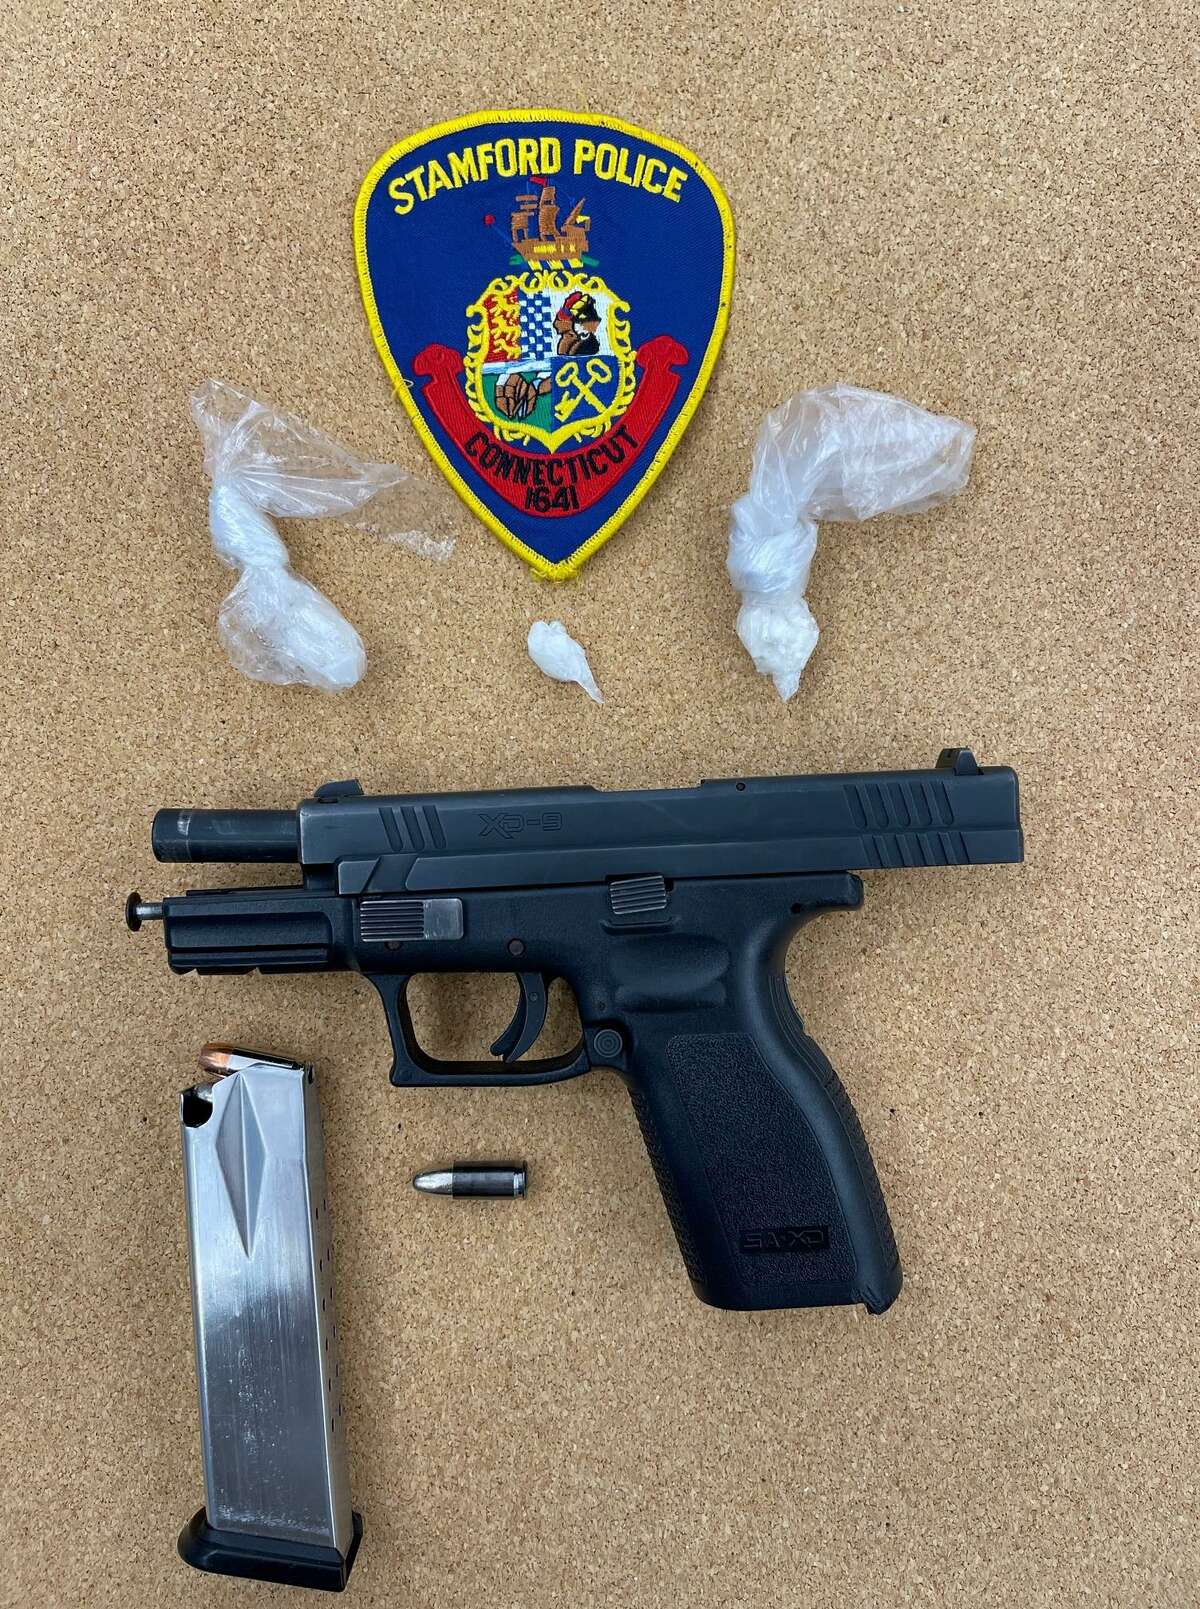 Stamford police said they recovered a loaded handgun with an illegal extended magazine and 6.5 grams of crack cocaine during a planned bust on Thursday, March 24, 2022.